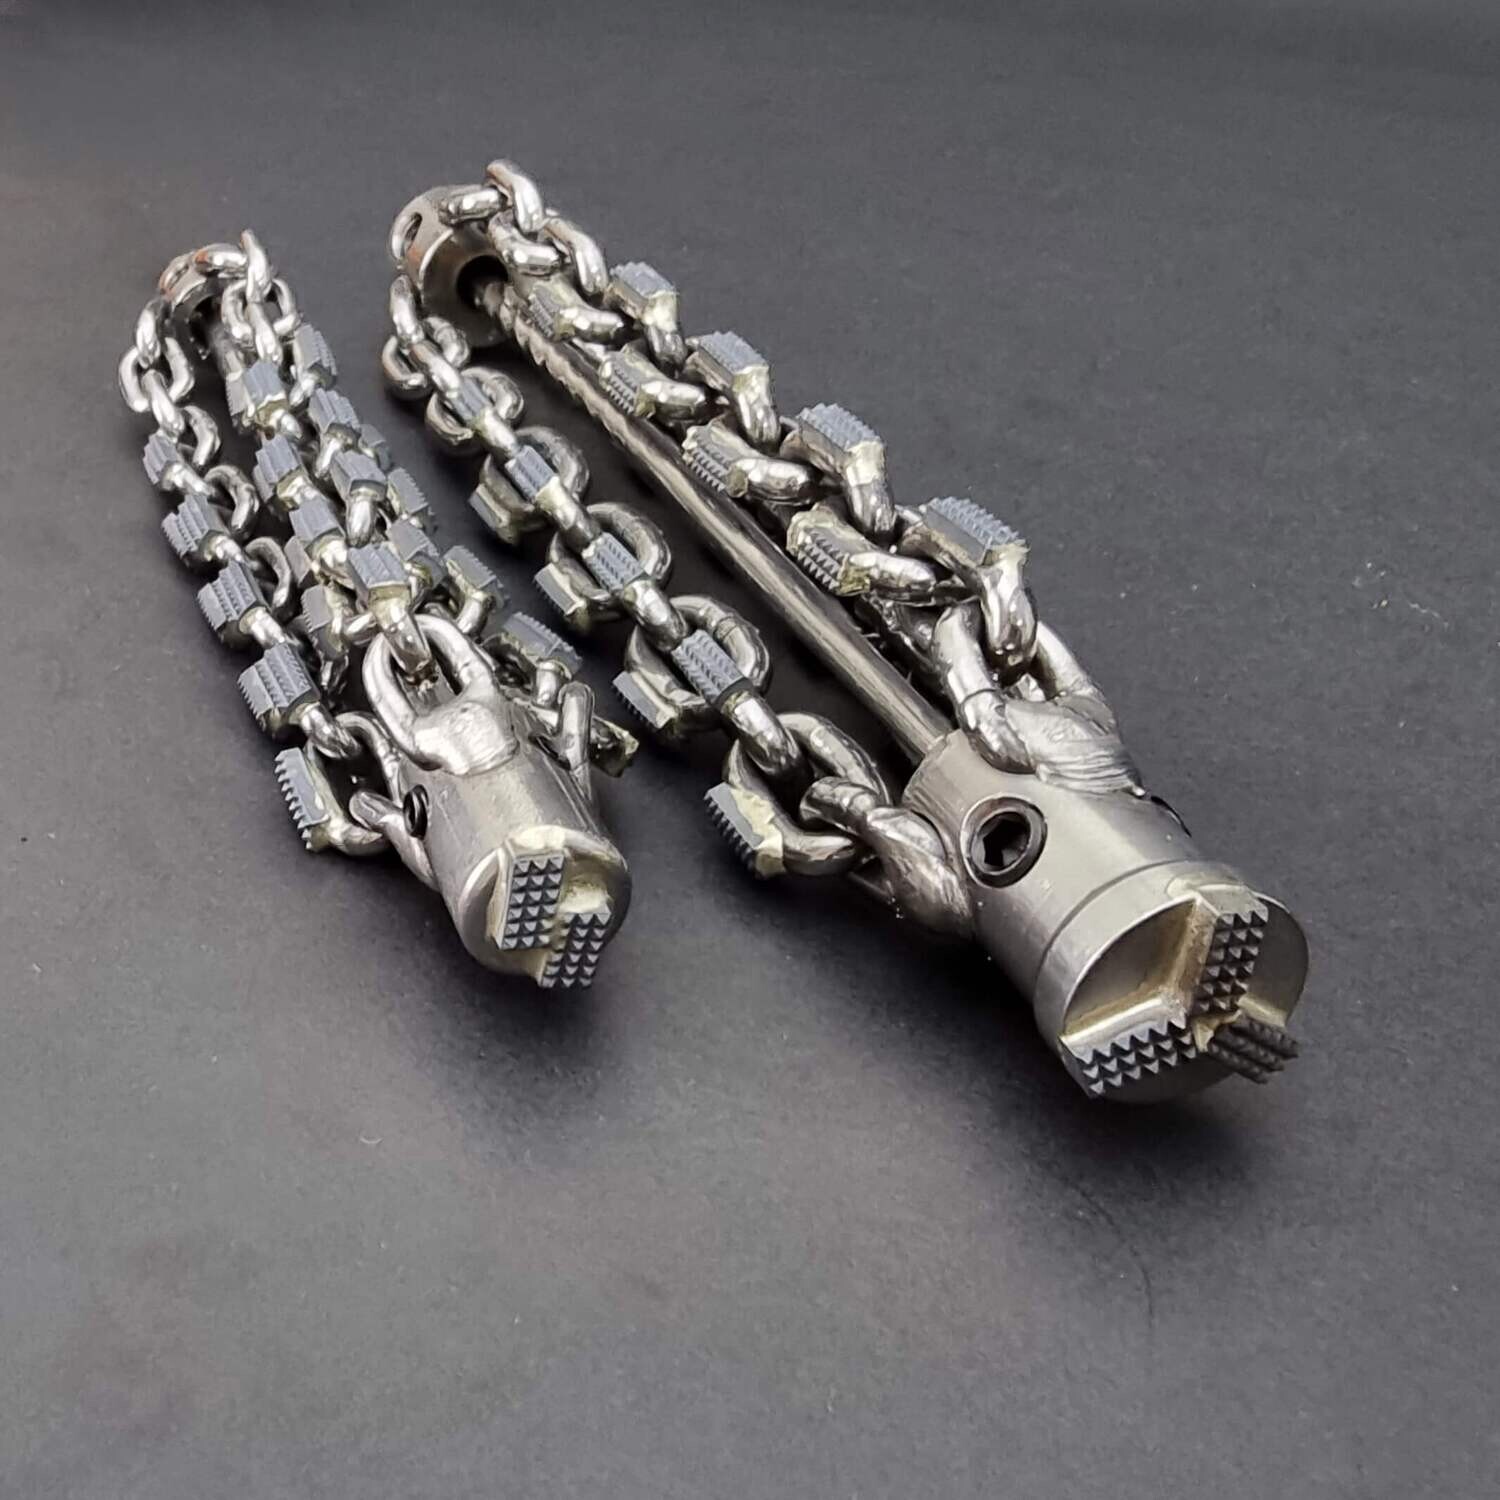 Lightweight - Croco Chain With Drill Head (Cast Iron & Clay Pipes) to go with the Ridgid flexshaft for obstruction and tuberculation removal in sewer pipes